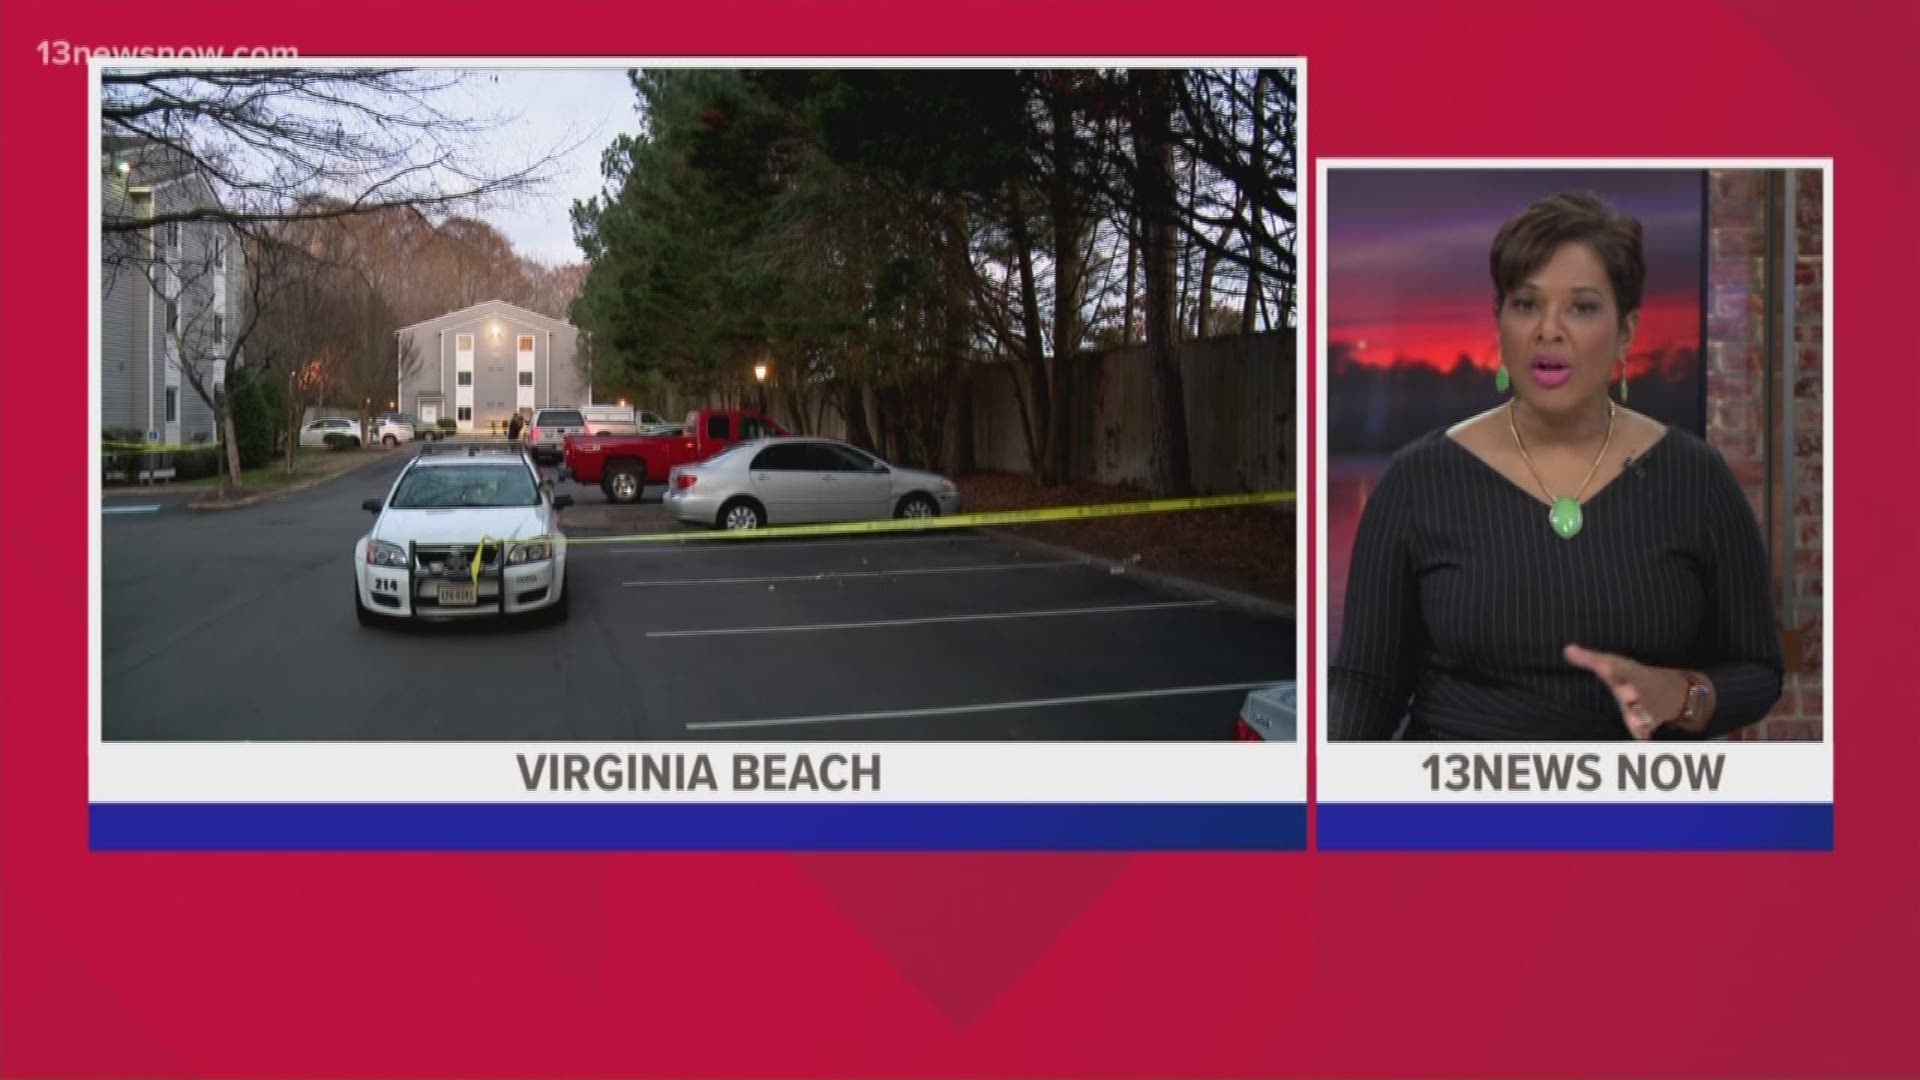 Virginia Beach Police arrested two people and are still looking for two more in connection to a shooting on Ocean Trace Lane and a police chase afterwards.